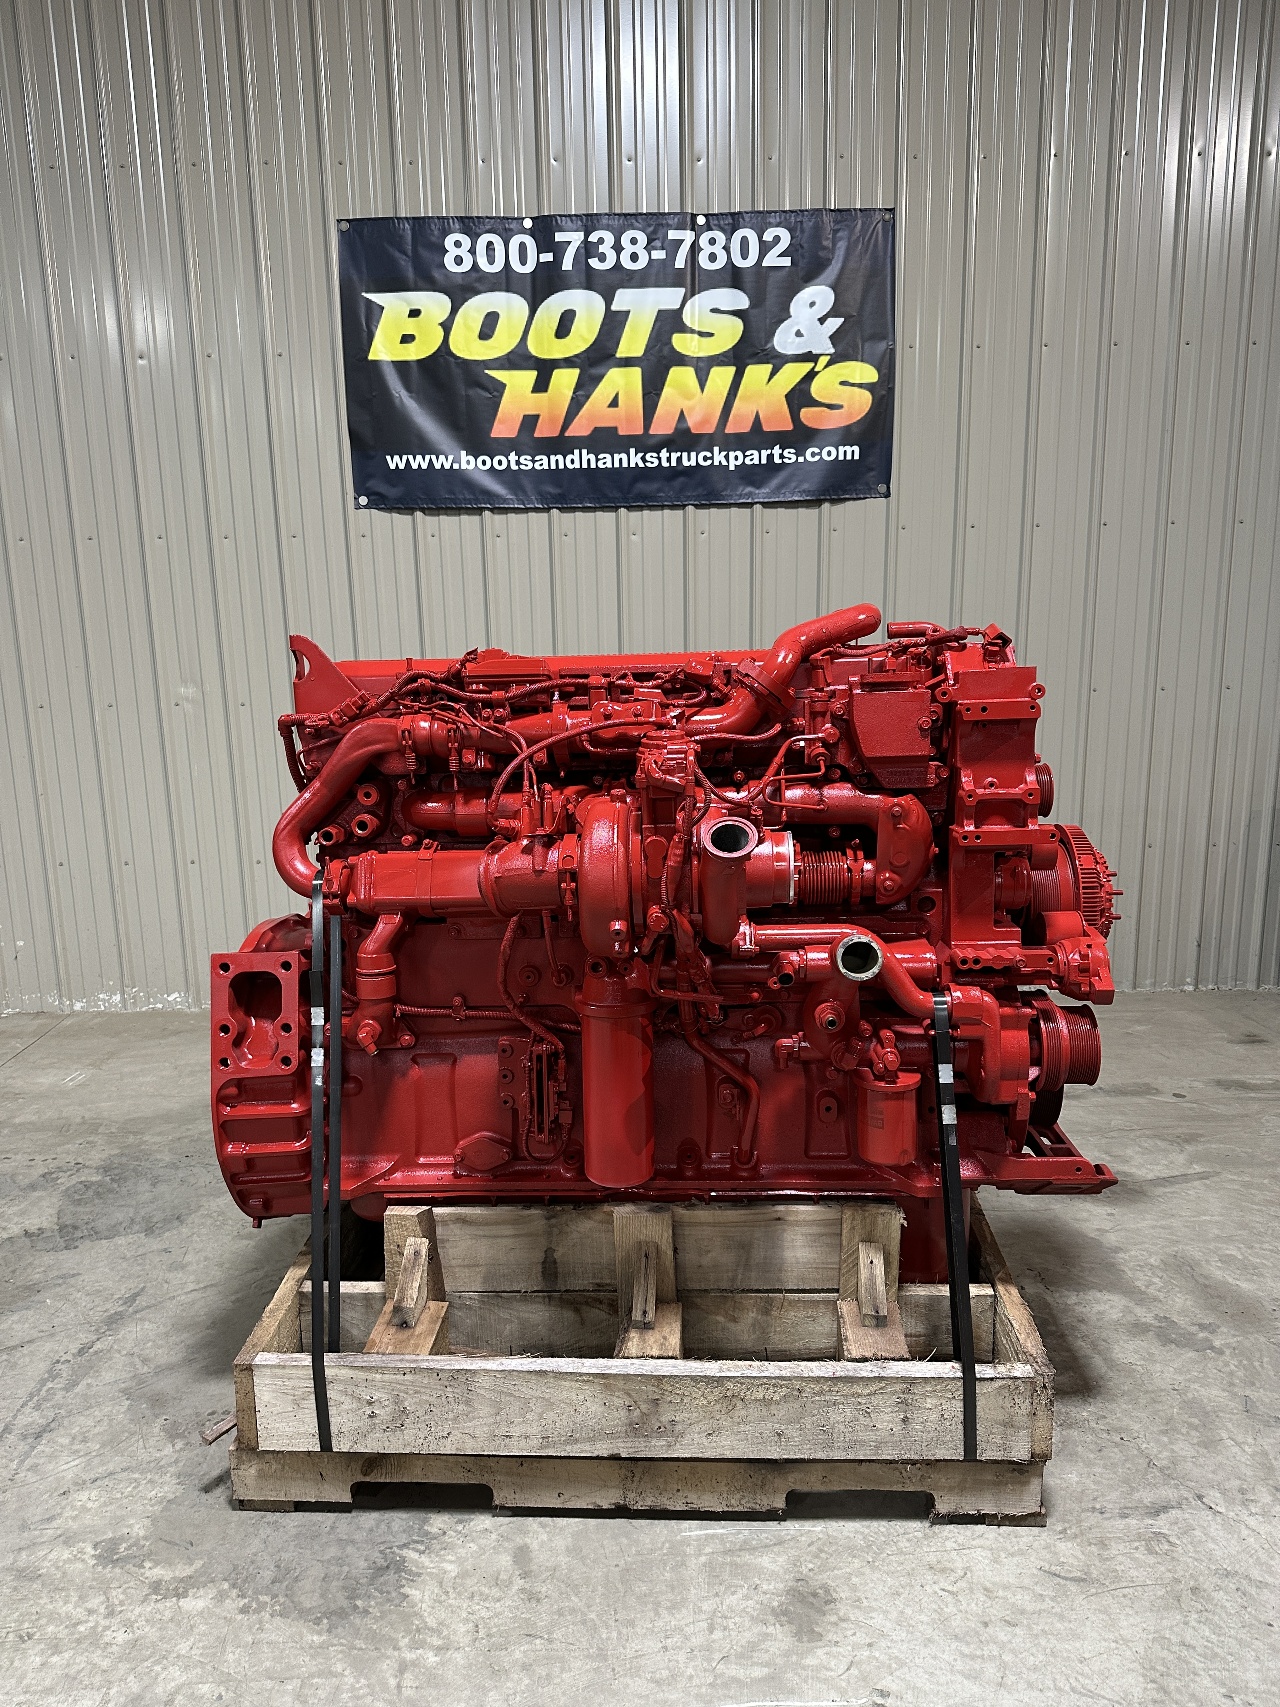 USED 2015 CUMMINS ISX15 COMPLETE ENGINE TRUCK PARTS #2001